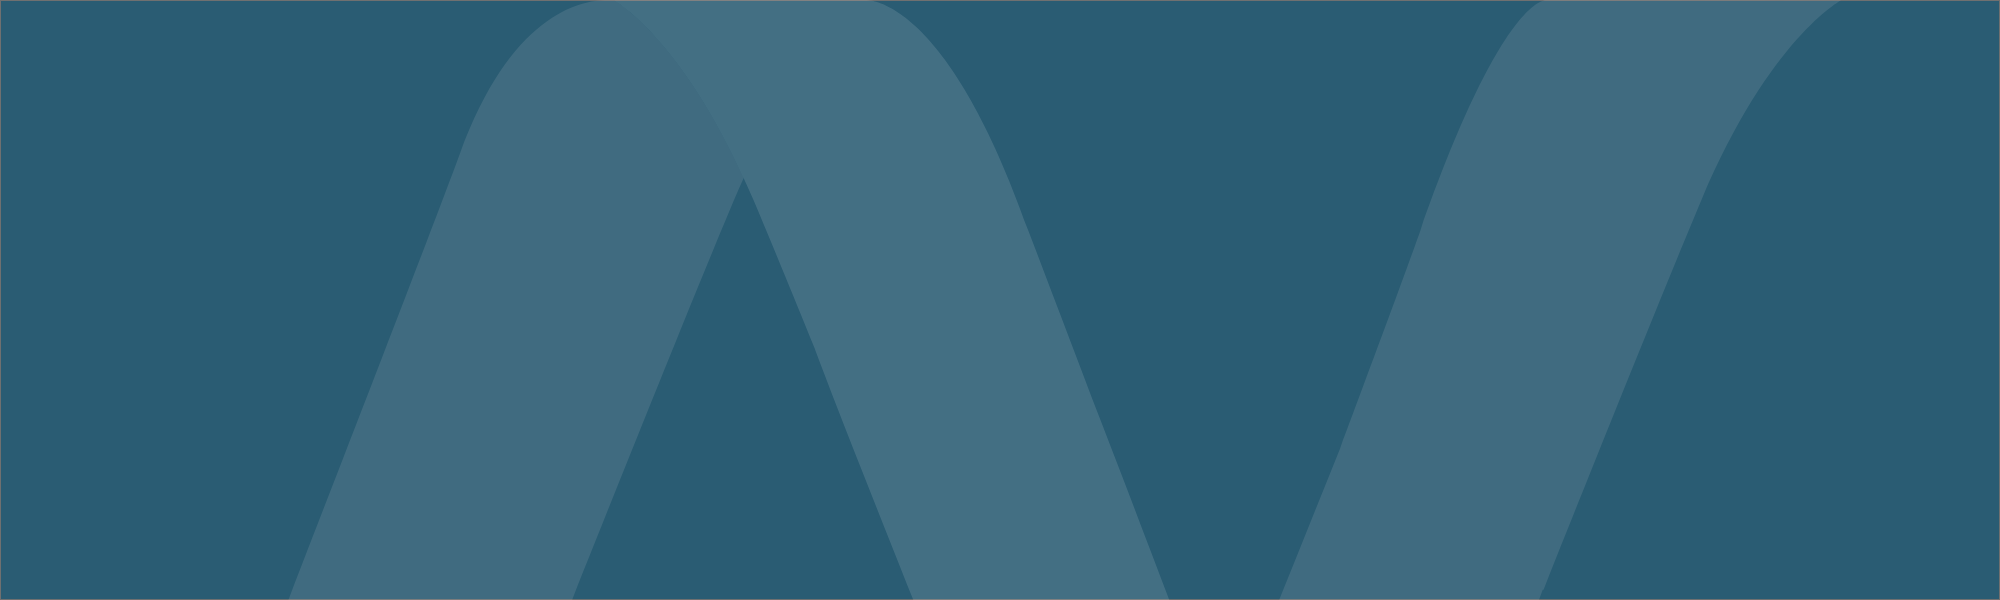 Generic-header-2000x600px-Teal-Blue.png 